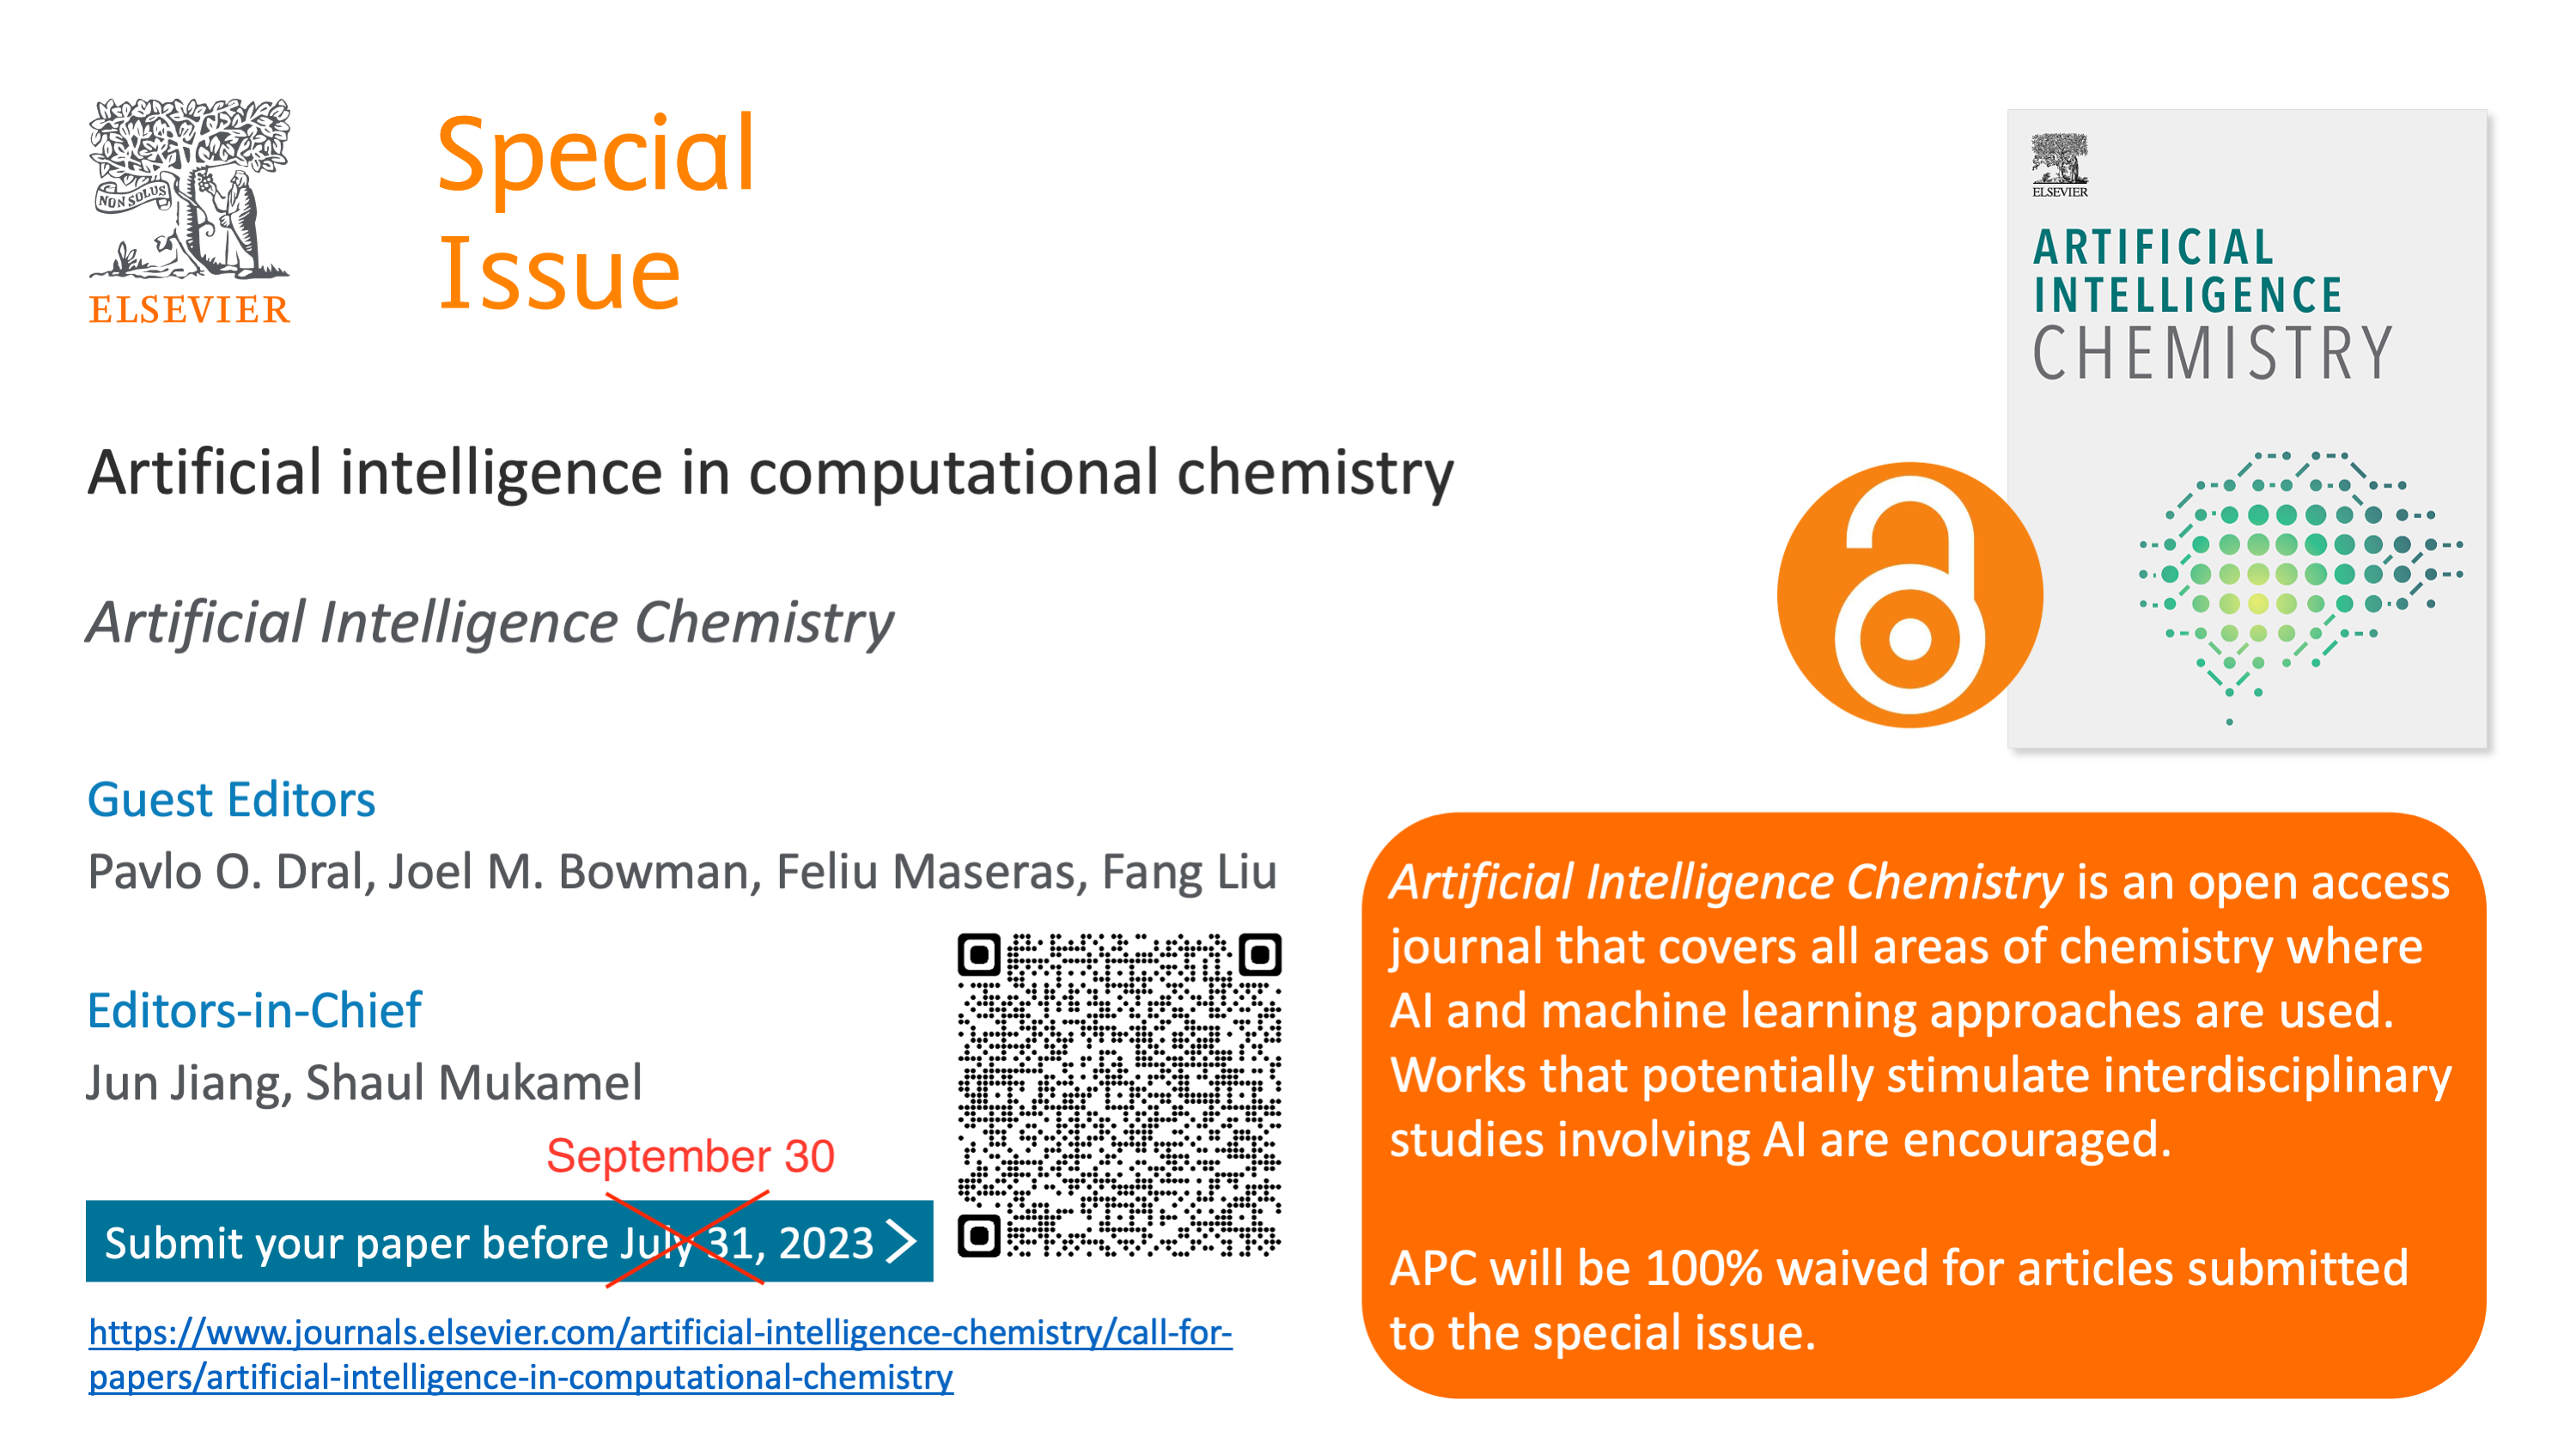 Submissions to Special Issue ‘Artificial Intelligence in Computational Chemistry’ is extended to September 30!